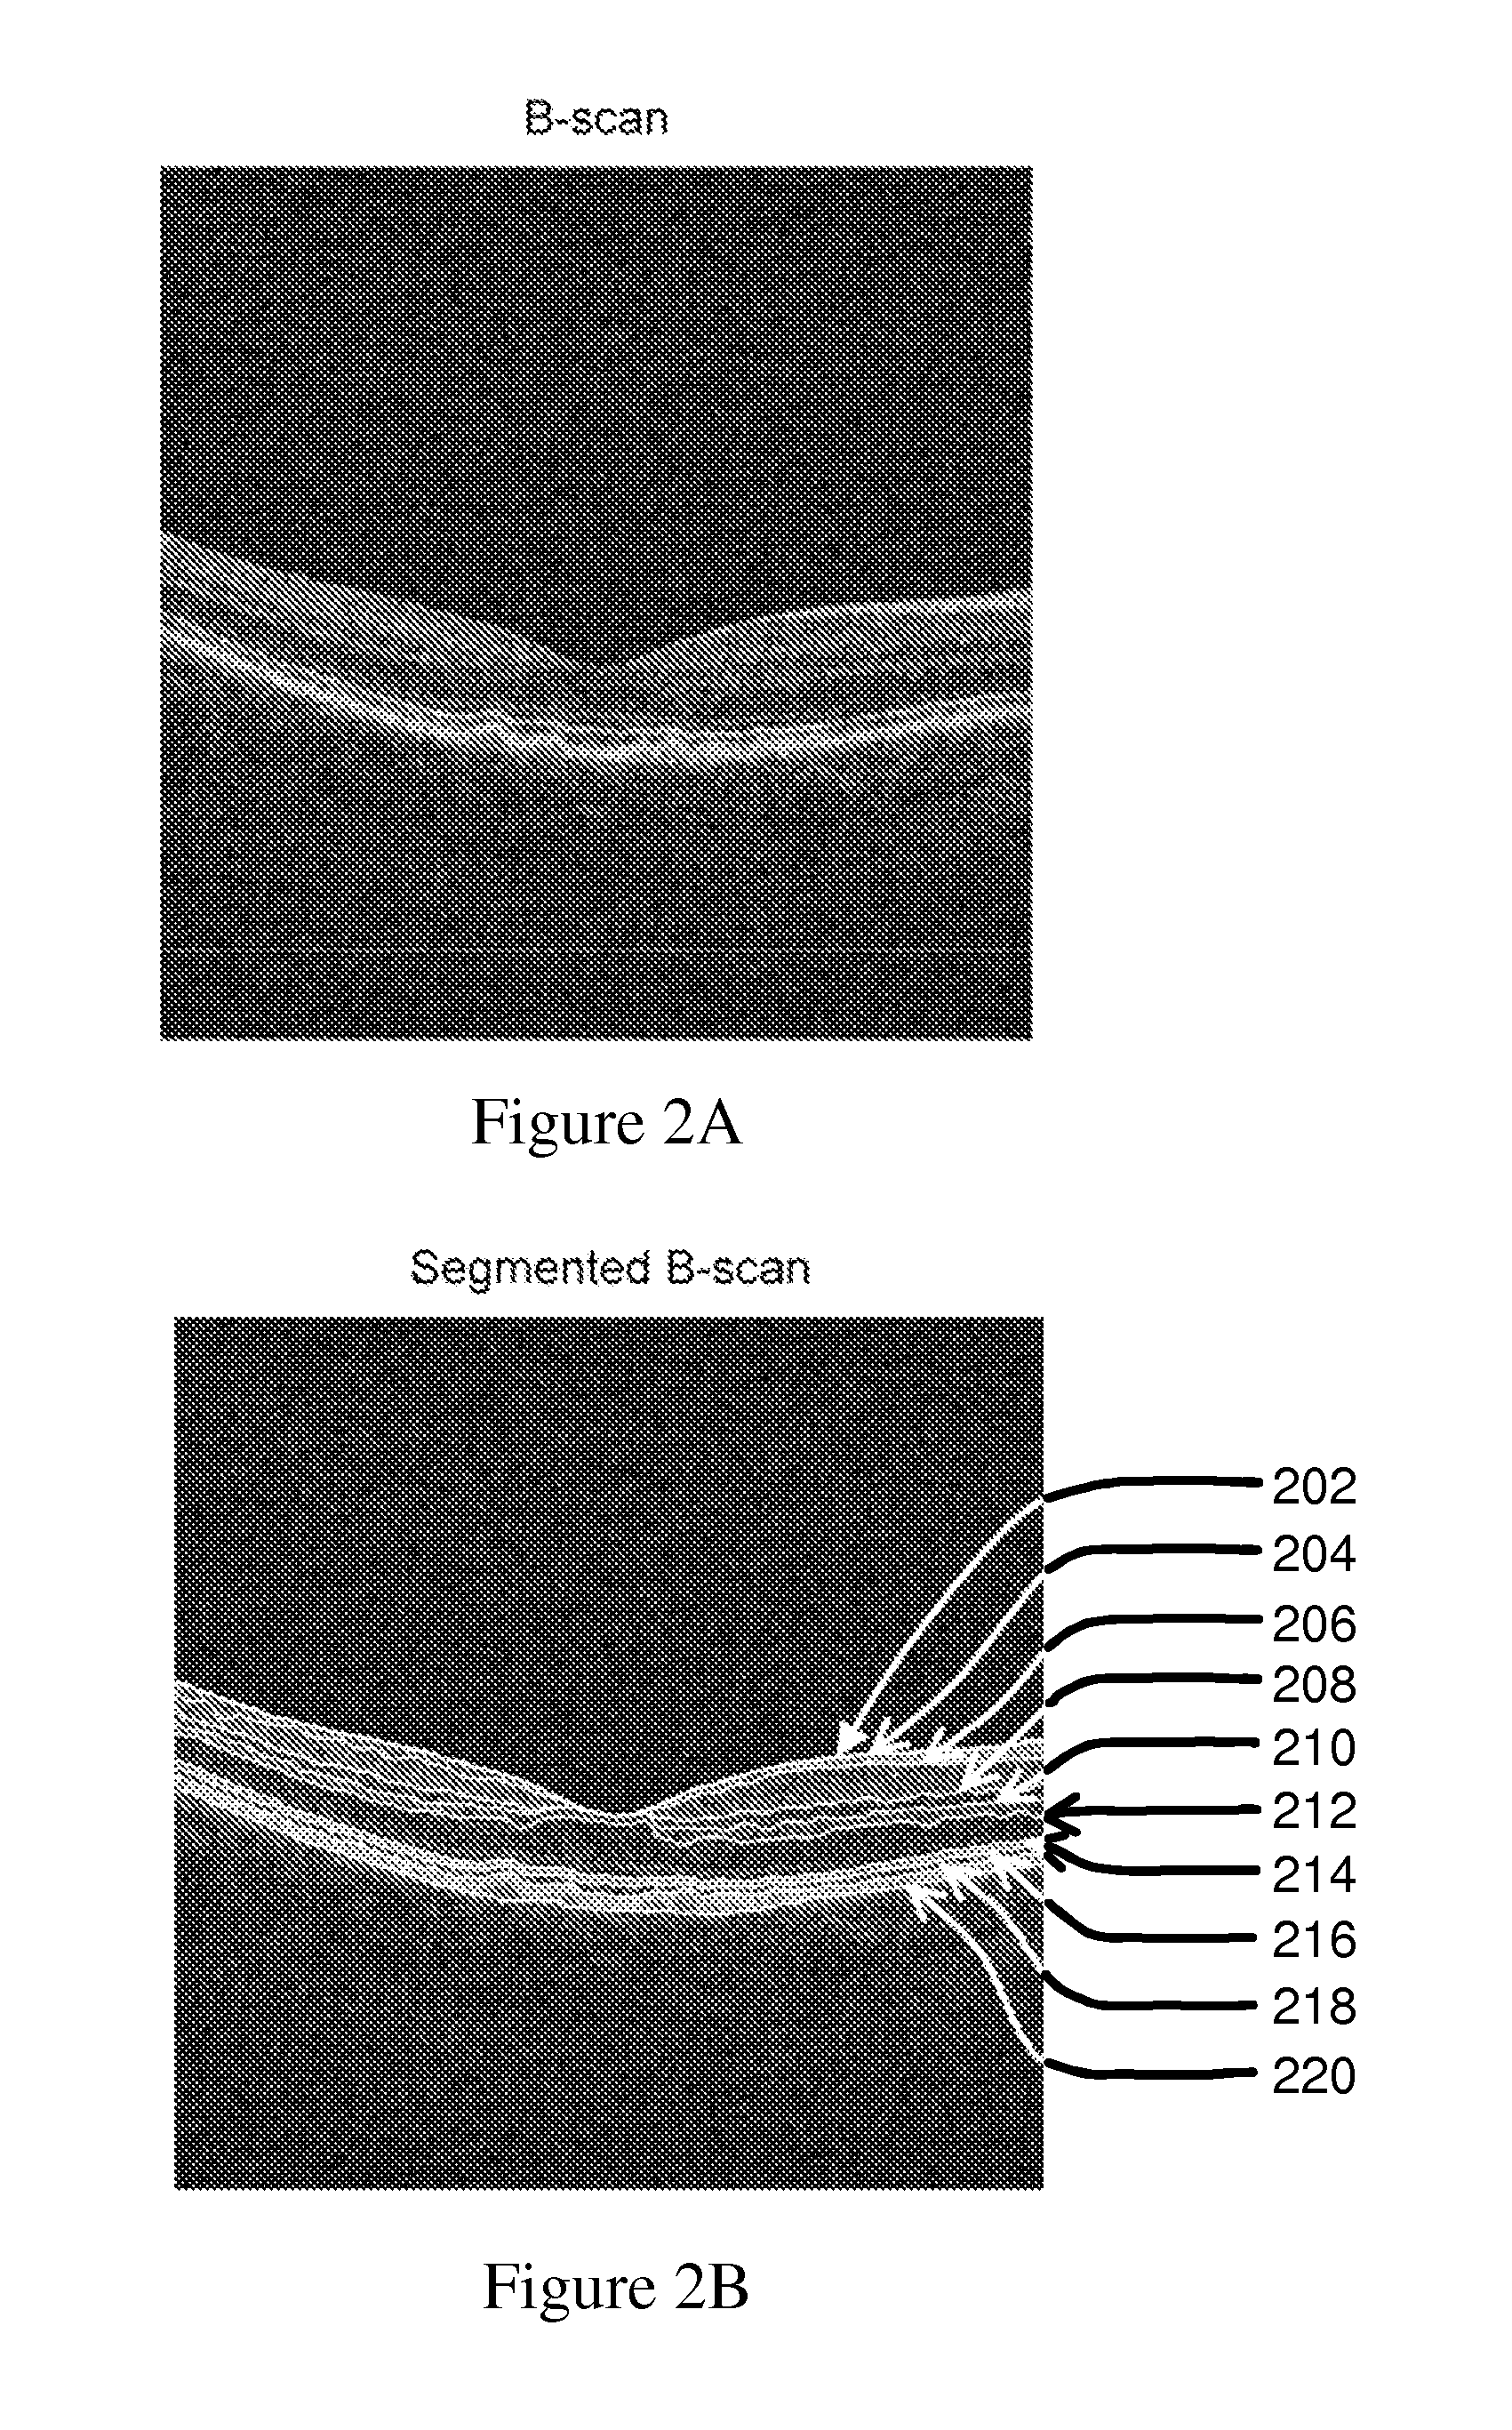 Method and System for Evaluating Progression of Age-Related Macular Degeneration